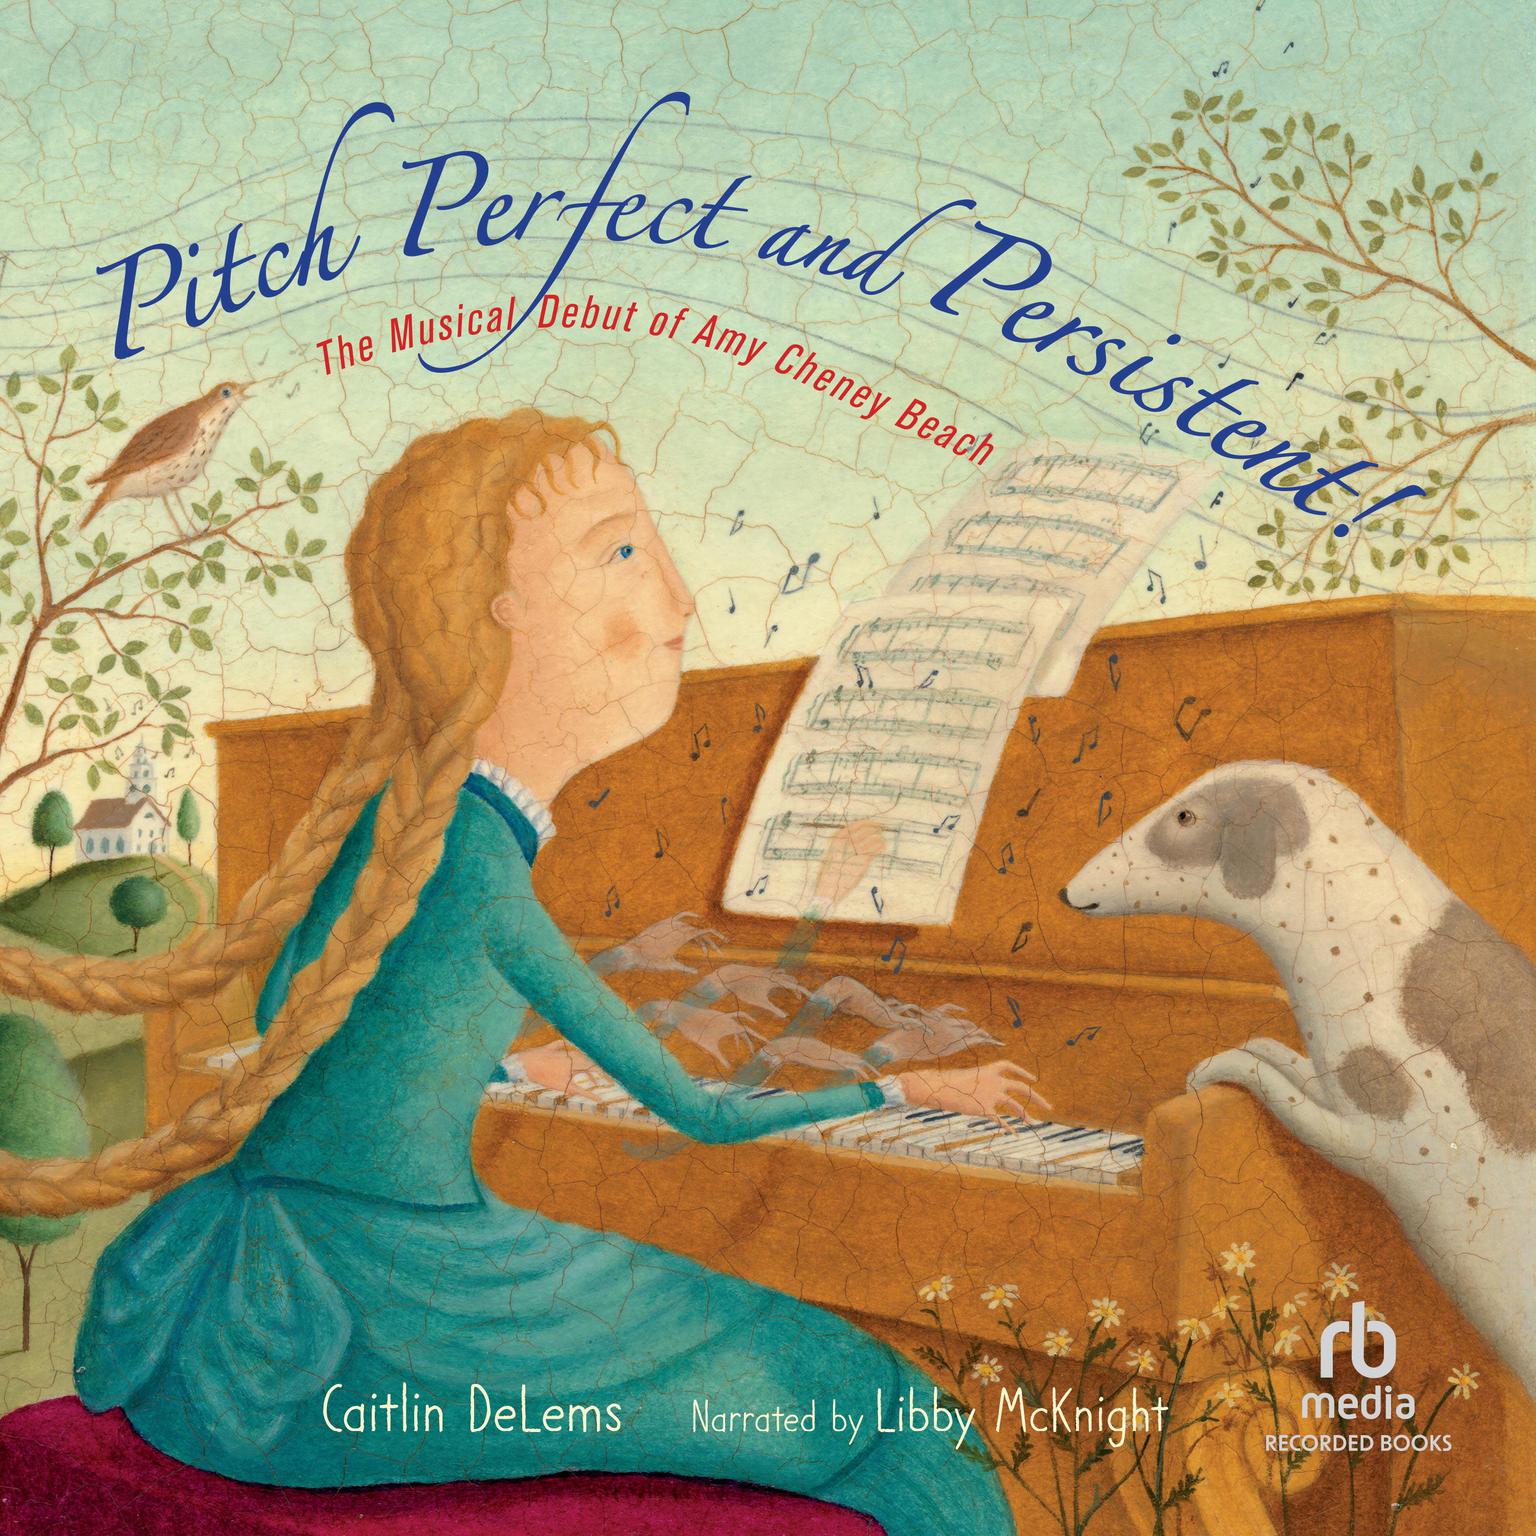 Pitch Perfect and Persistent!: The Musical Debut of Amy Cheney Beach Audiobook, by Caitlin DeLems